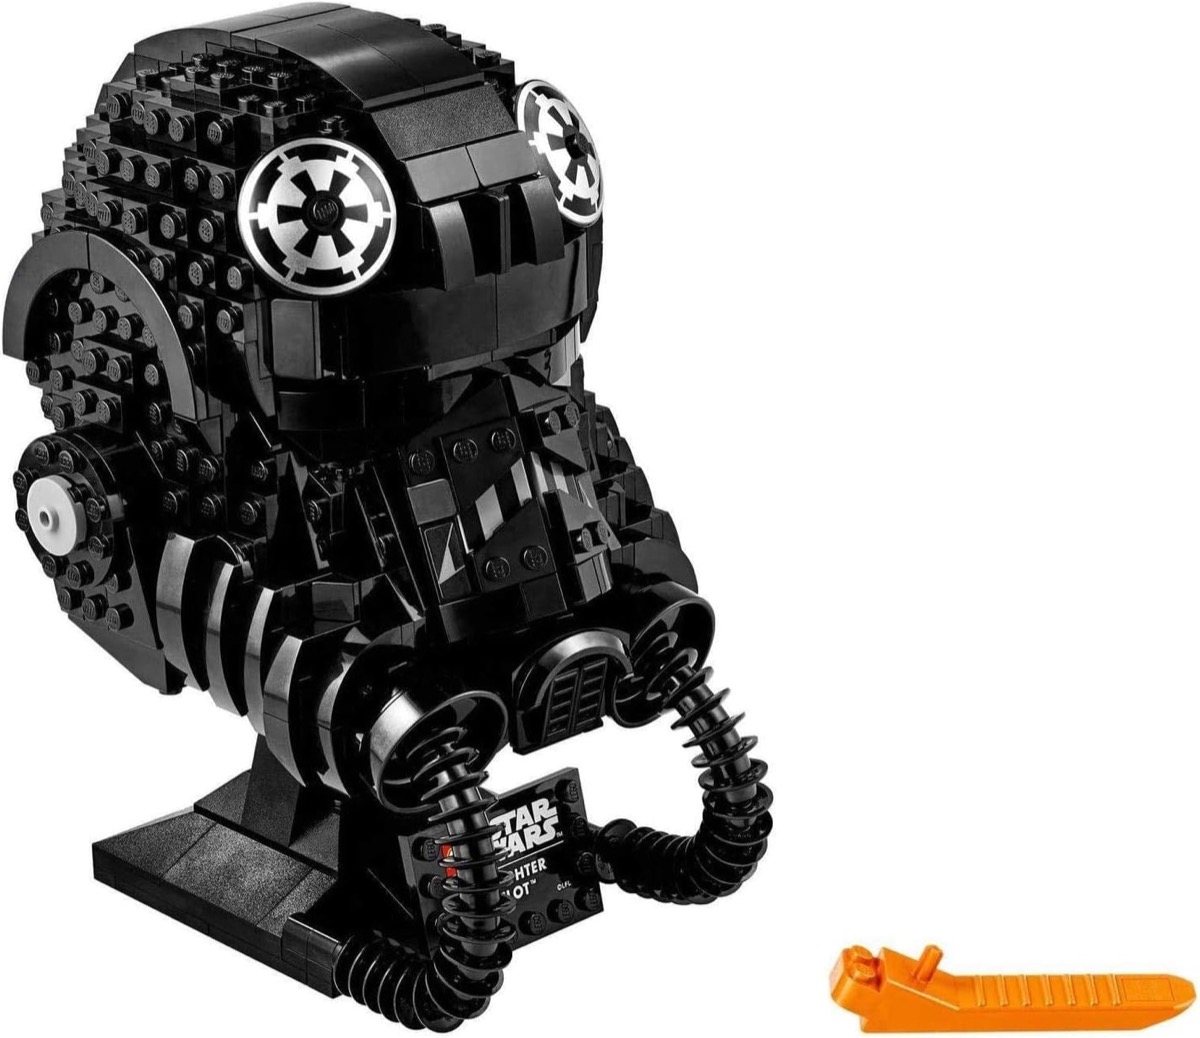 A LEGO version of a TIE Fighter helmet from "Star Wars"